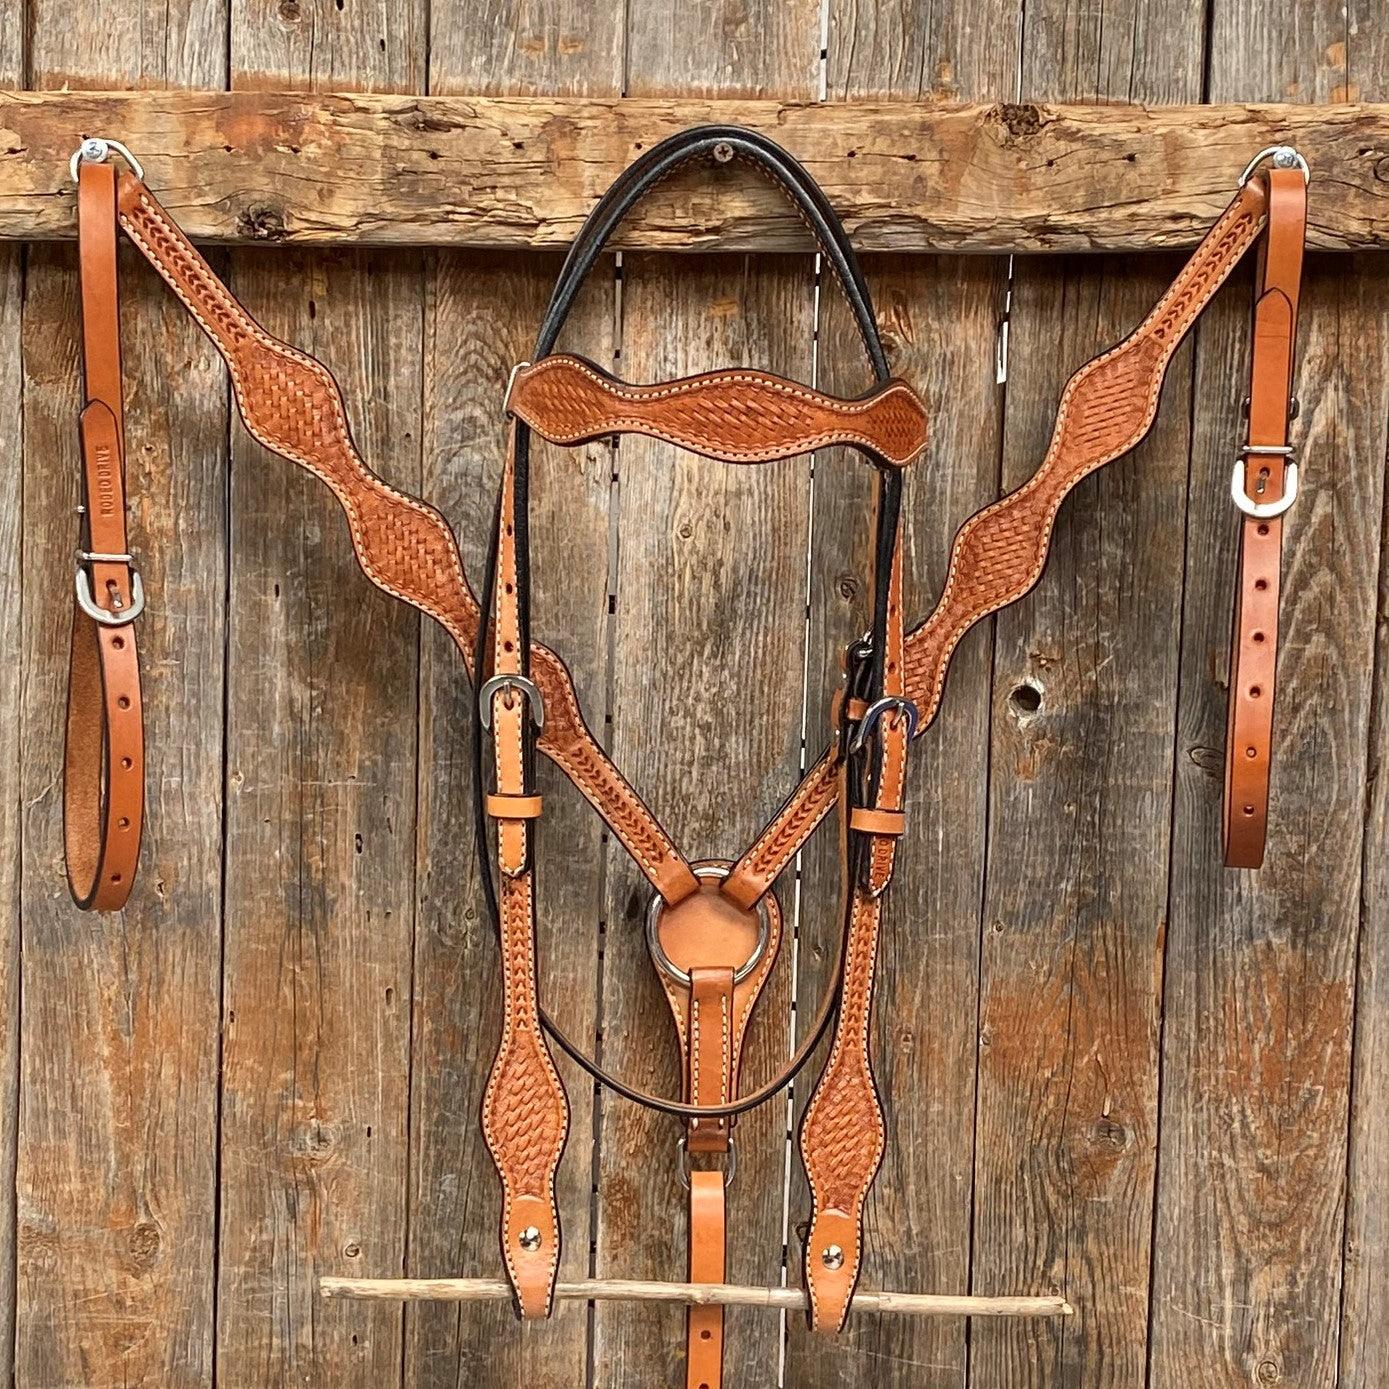 The Pearl LV Tack Set – RockedCouture